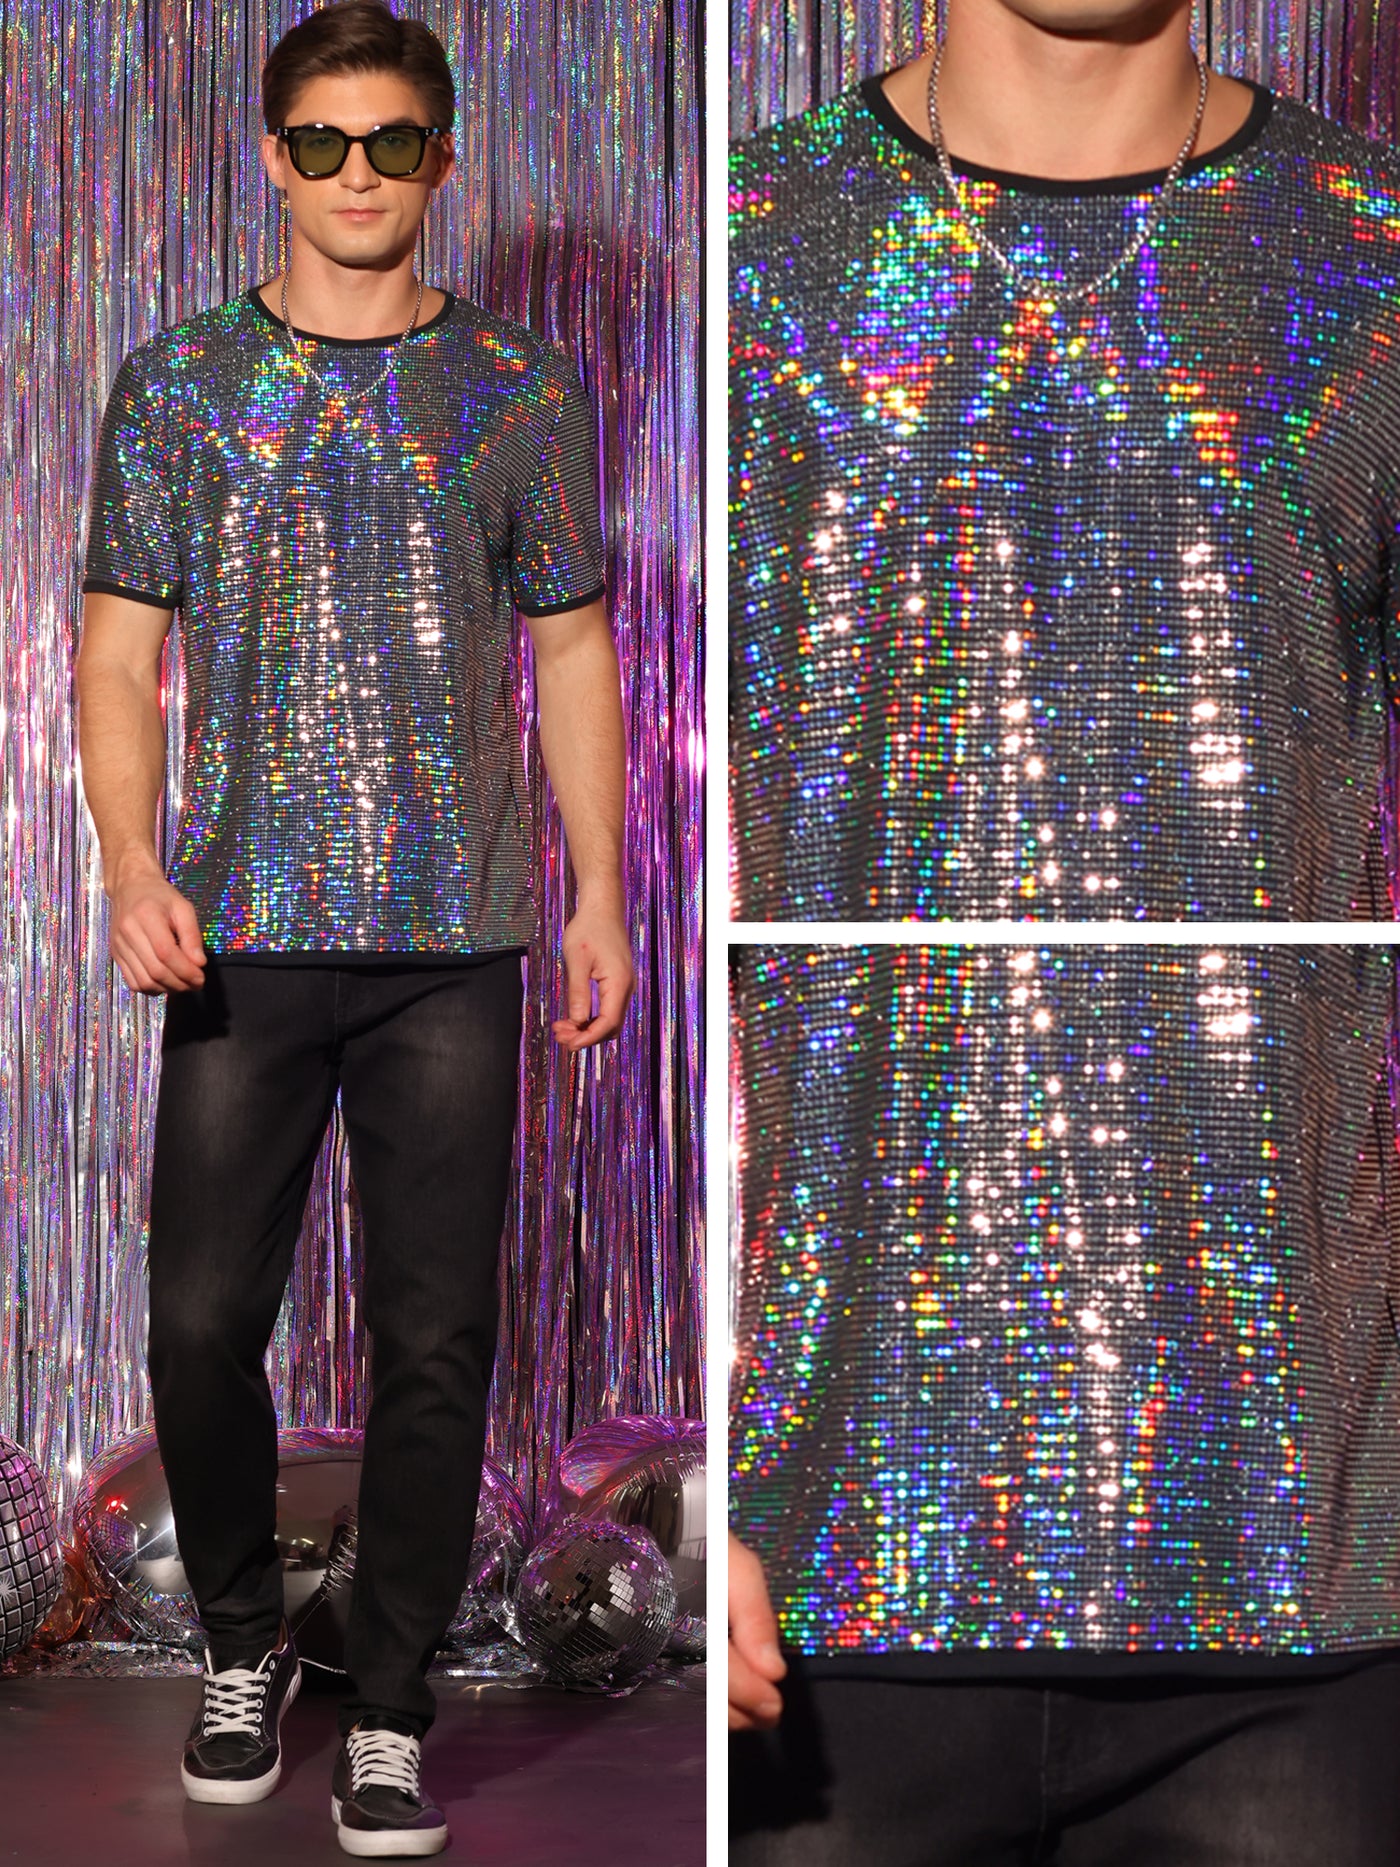 Bublédon Sequin Shirts for Men's Short Sleeves Crew Neck Nightclub Party T-Shirts